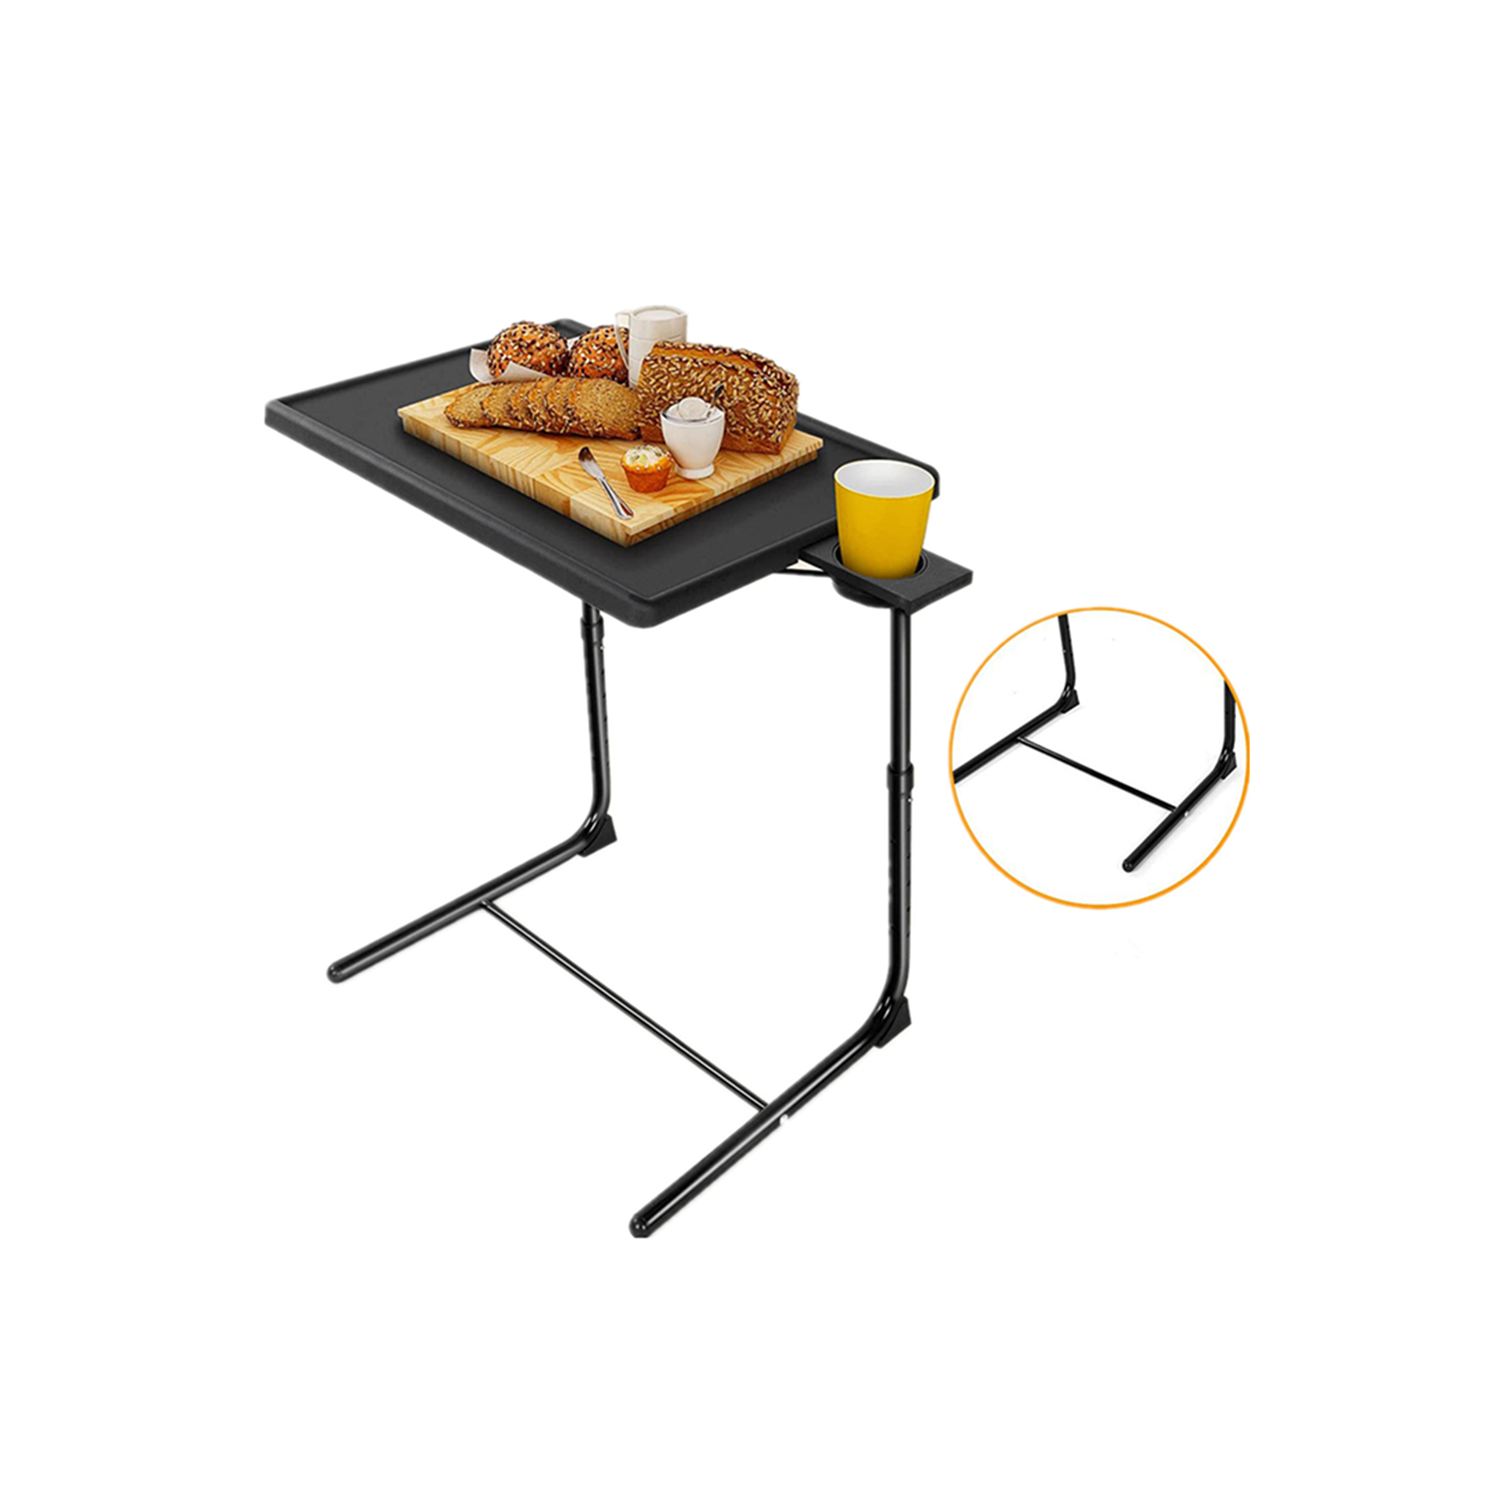 Foldable TV Tray Table with Adjustable Legs and 3 Tilt Angles With 3'' cup holder design for Working or Leisure Time Home Kitchen